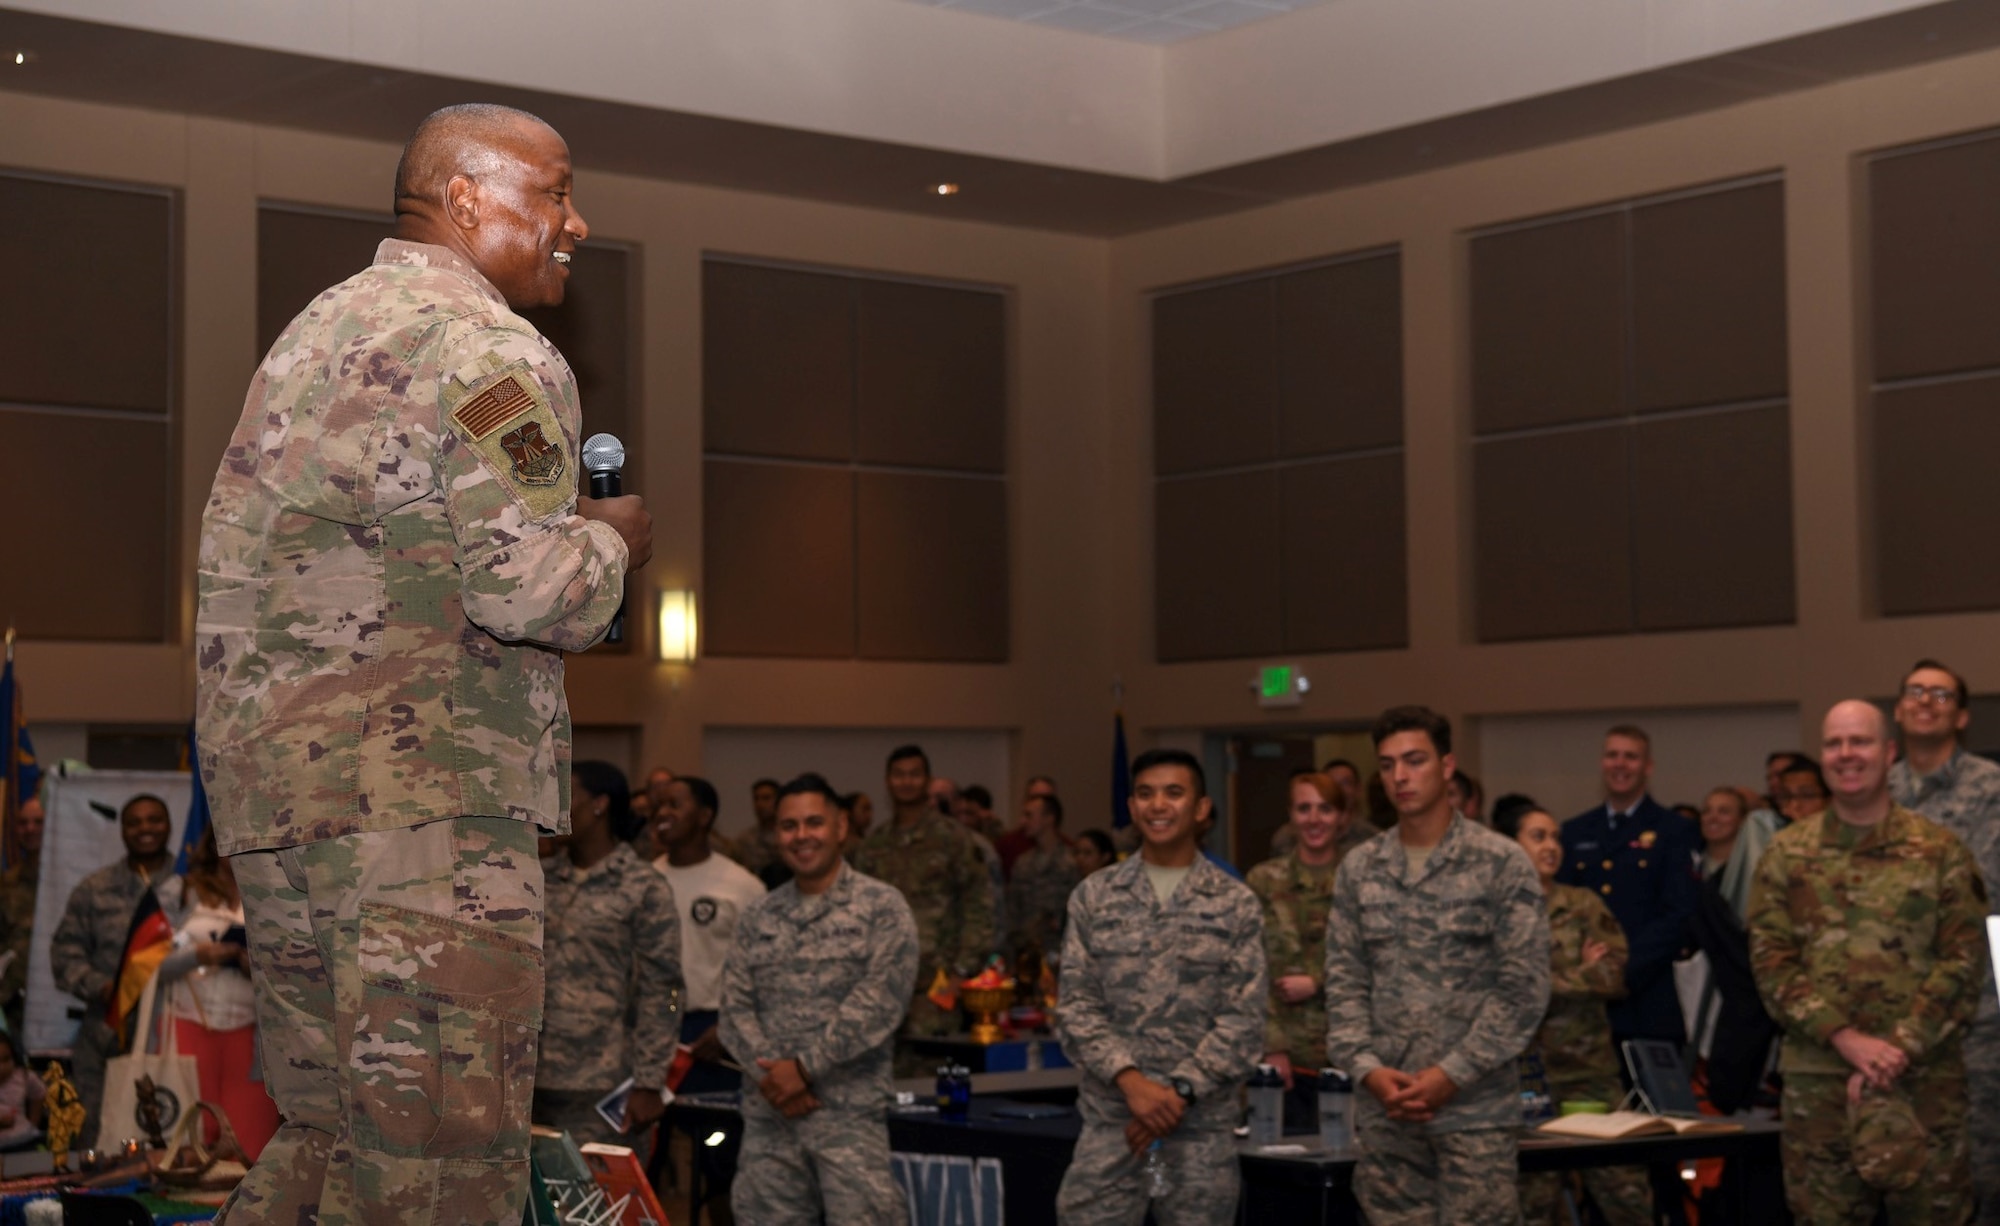 Col. Devin Pepper, 460th Space Wing commander offers opening remarks, Sept. 26, 2019, on Buckley Air Force Base, Colo. Diversity Day provided an opportunity to explore and celebrate the accomplishments and cultures of a diverse military force. (U.S. Air Force photo by Senior Airman Michael D. Mathews)